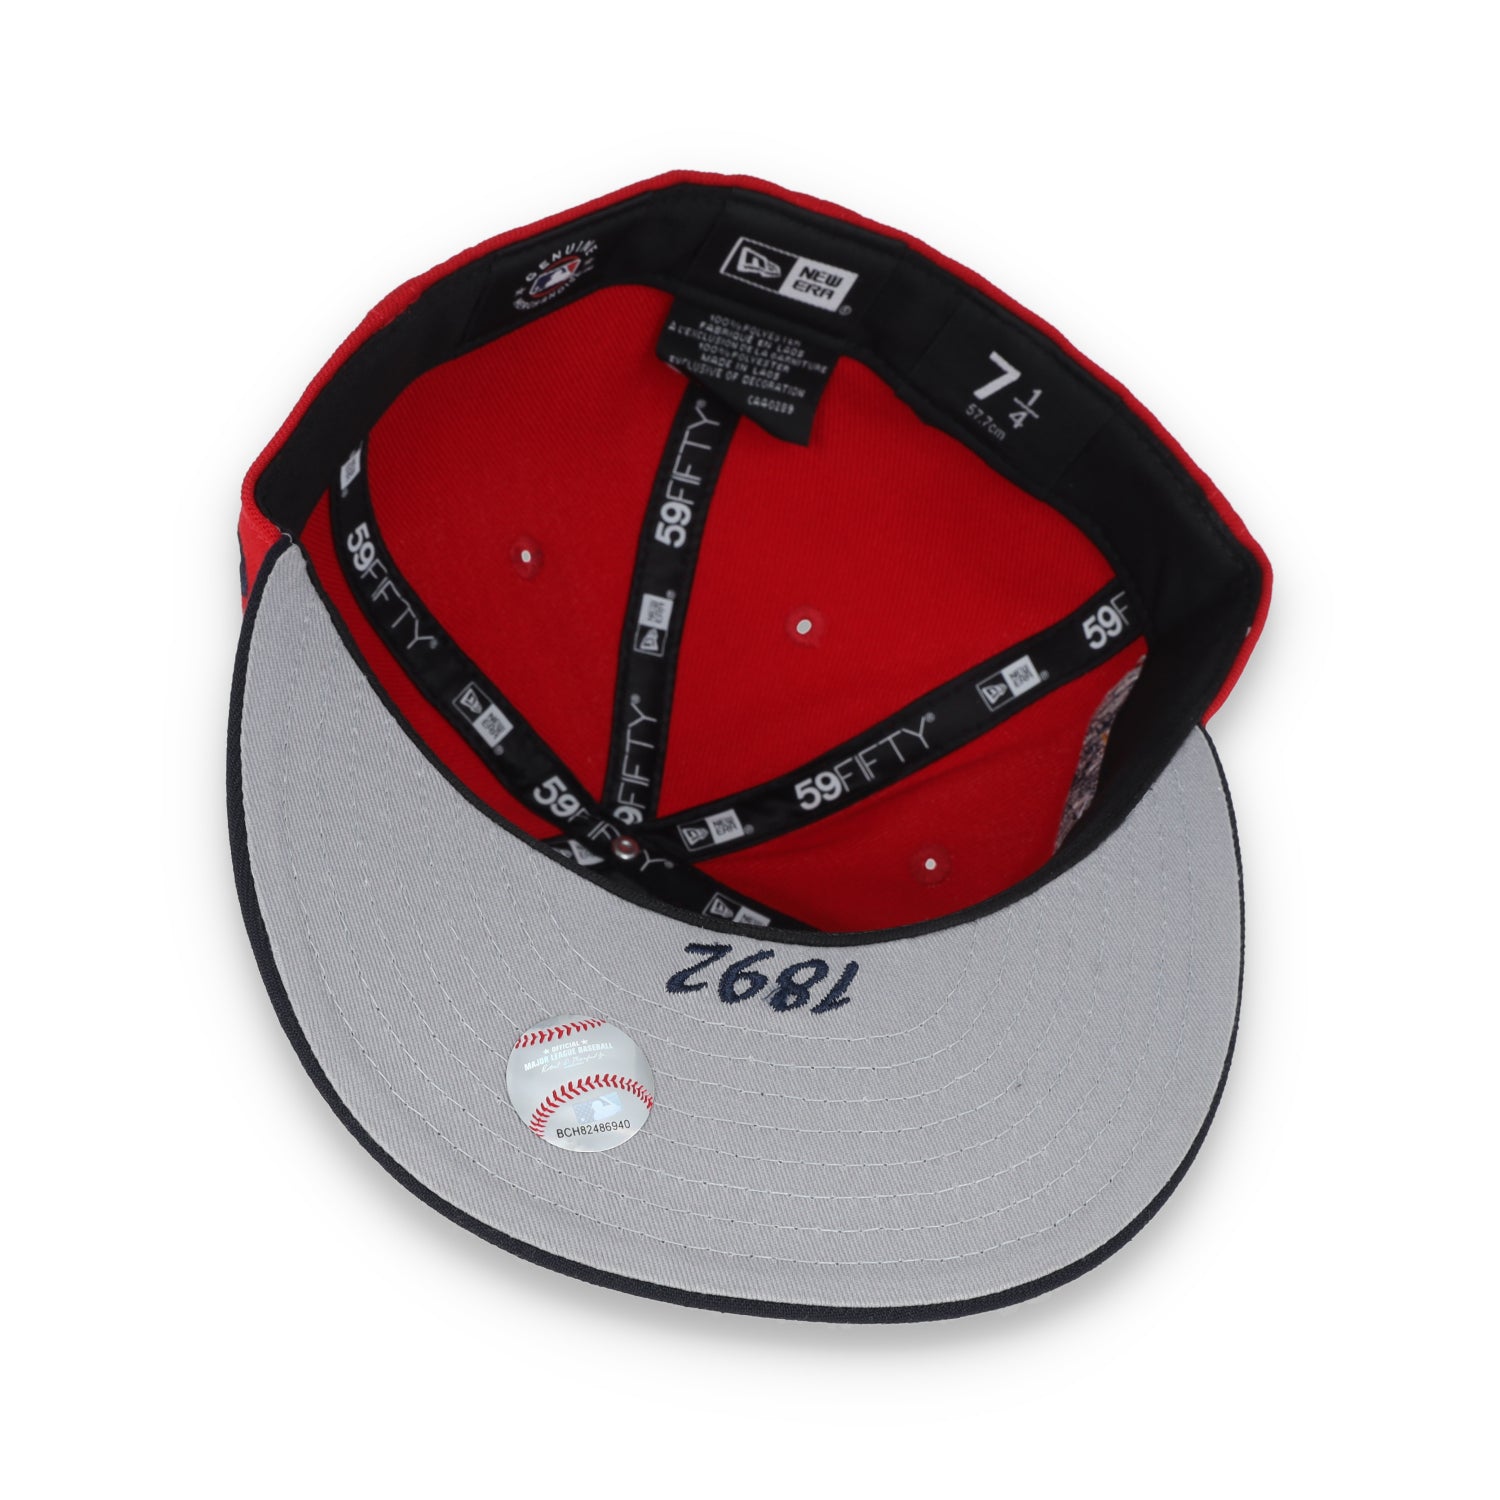 New Era St. Louis Cardinals NL Central 59FIFTY Fitted Hat - Red/B lack